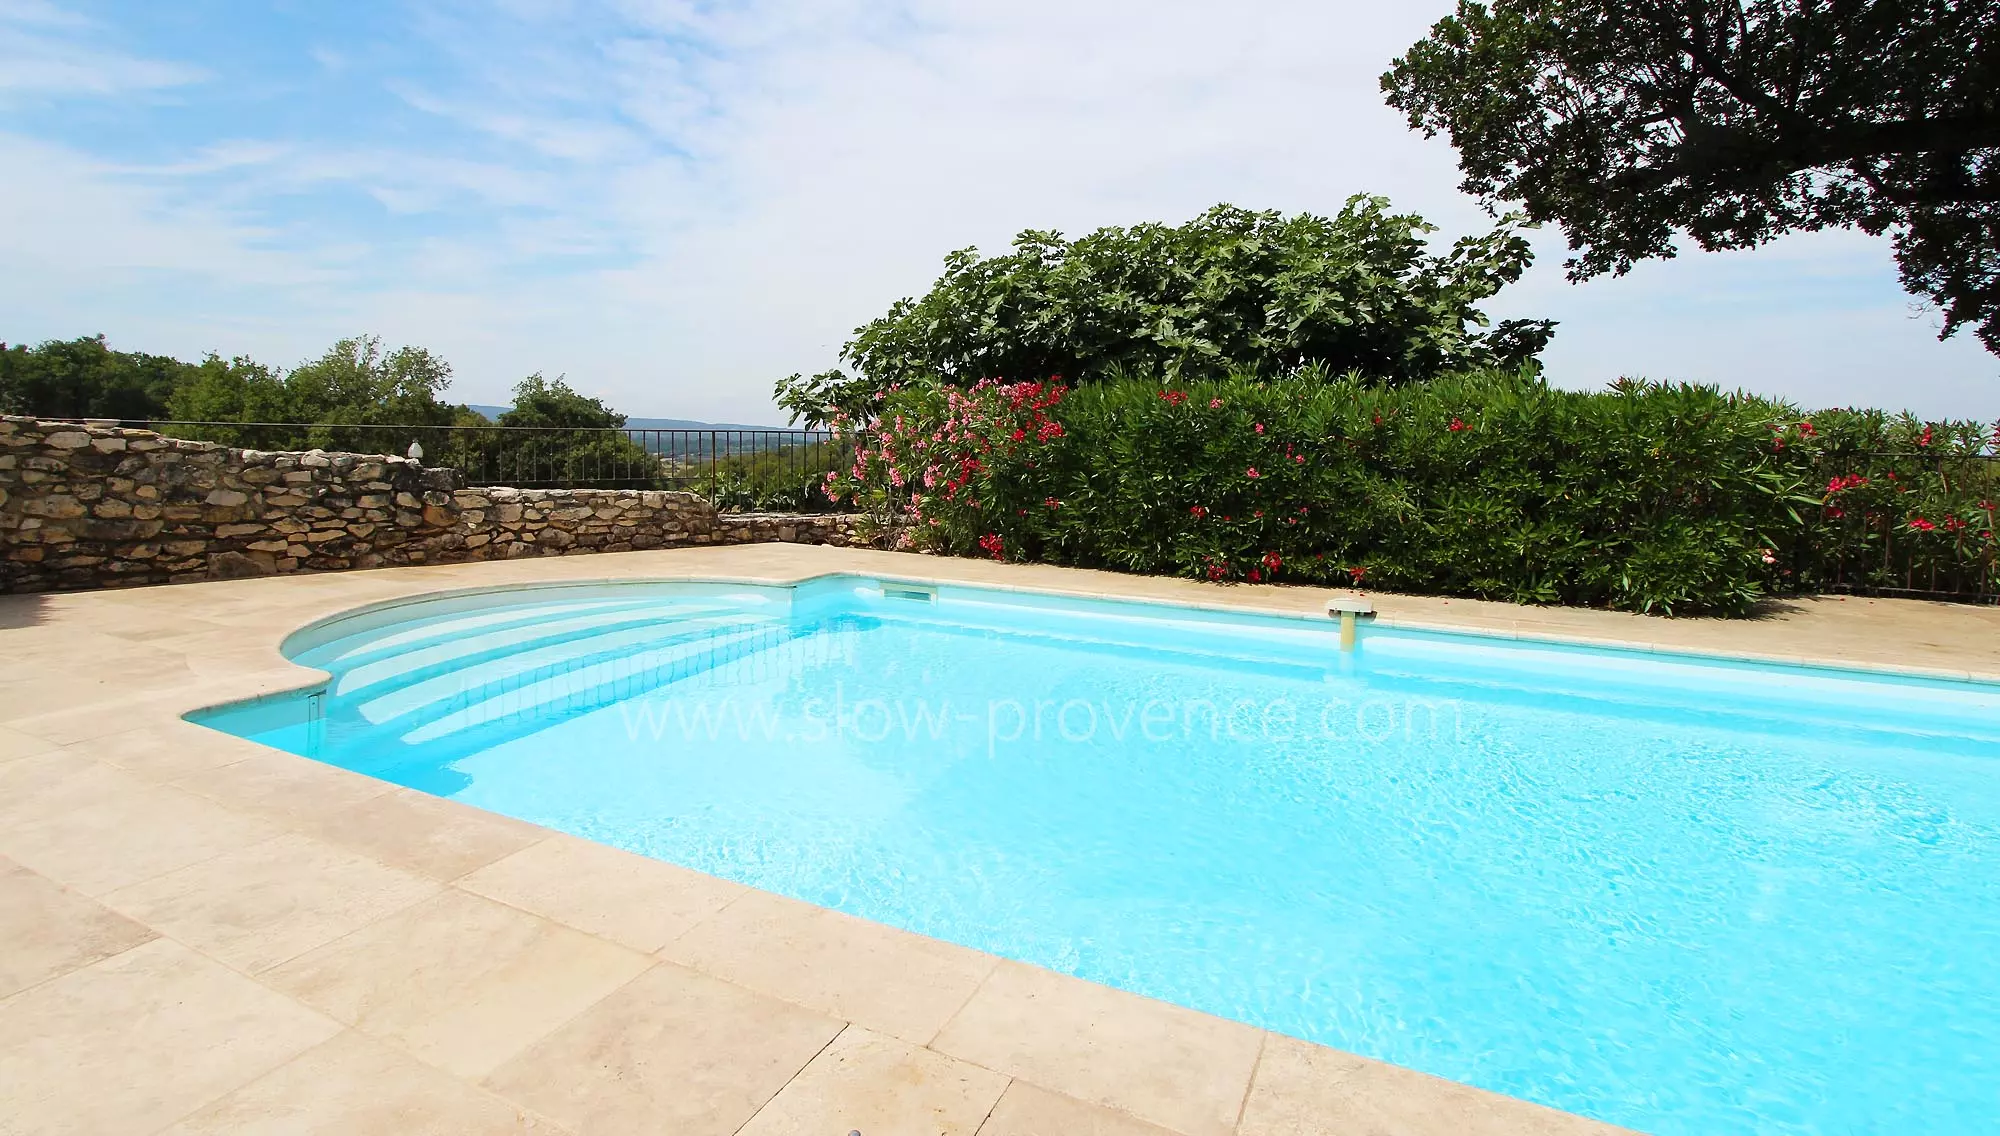 Private swimming pool with vineyard view